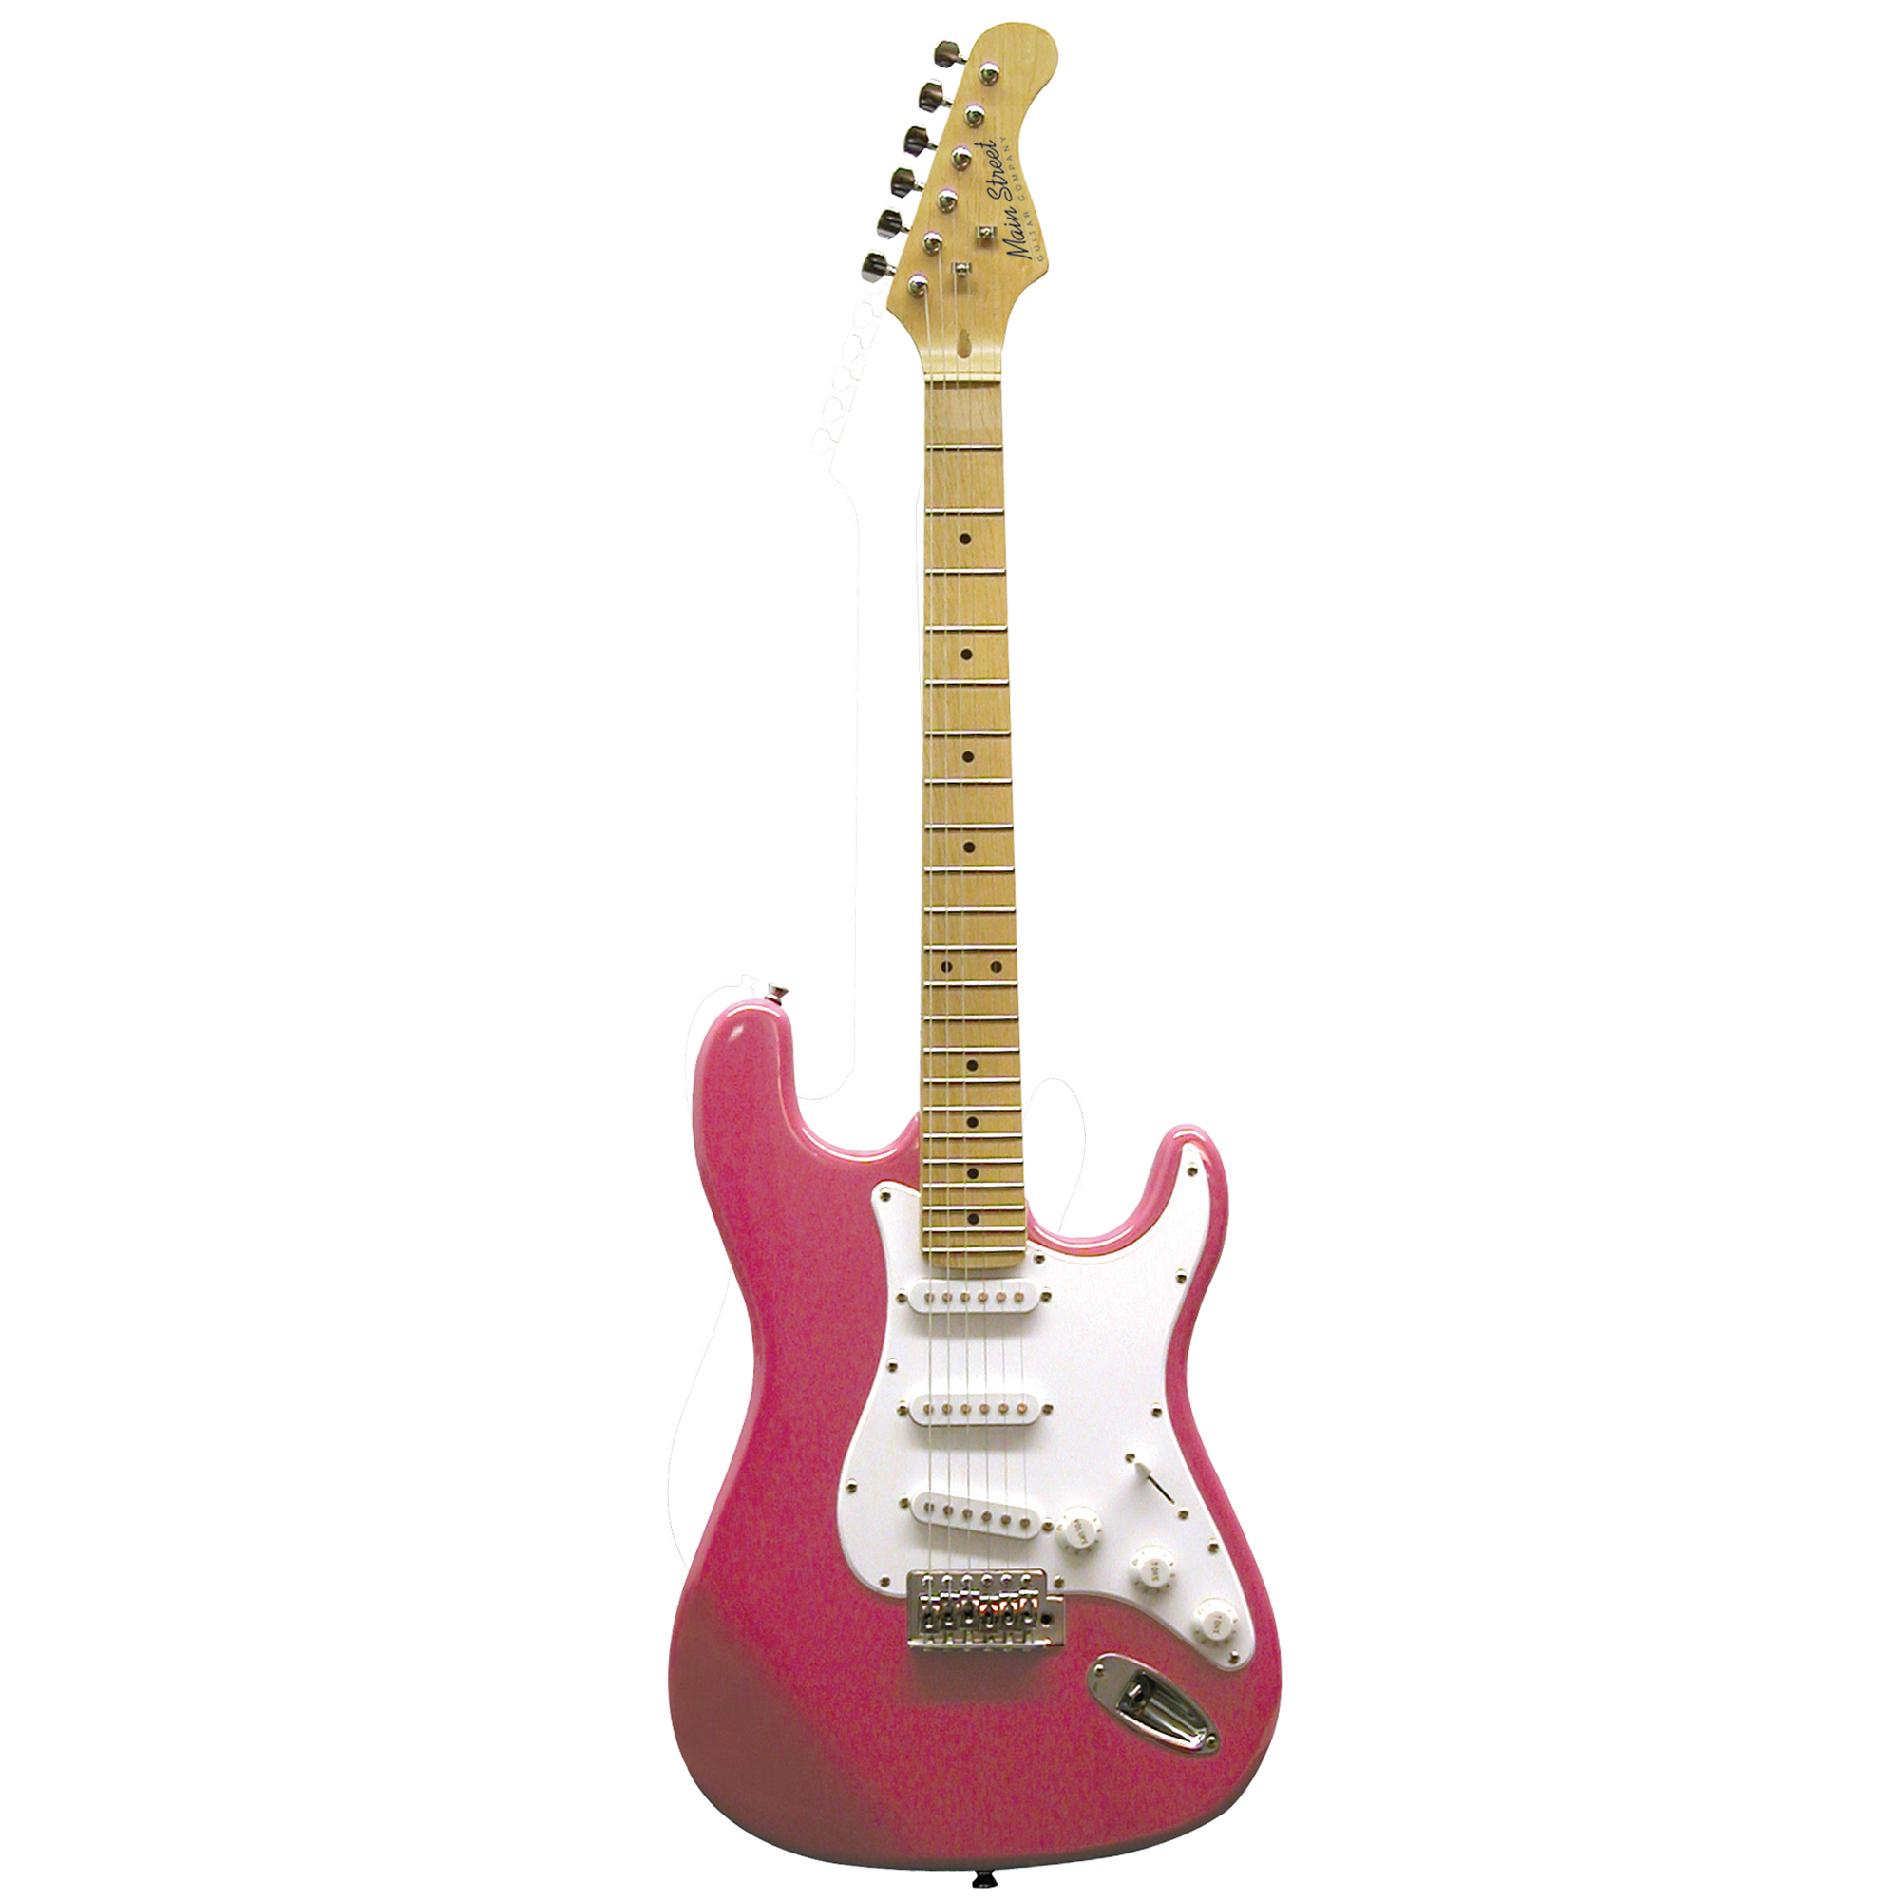 Main Street Double Cutaway Electric Guitar with Pink Laminated body